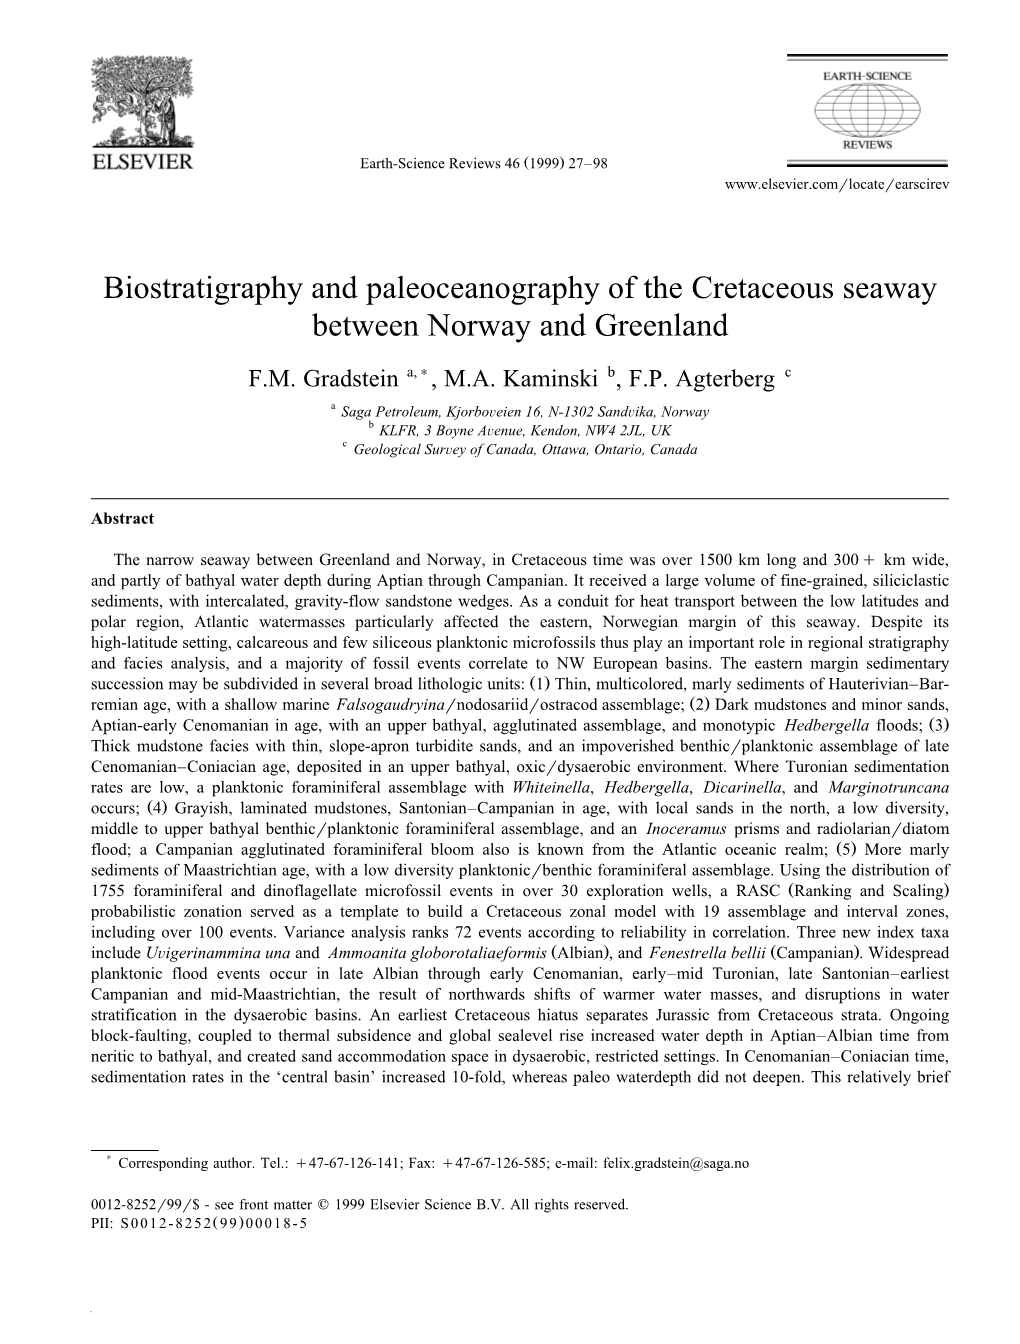 Biostratigraphy and Paleoceanography of the Cretaceous Seaway Between Norway and Greenland